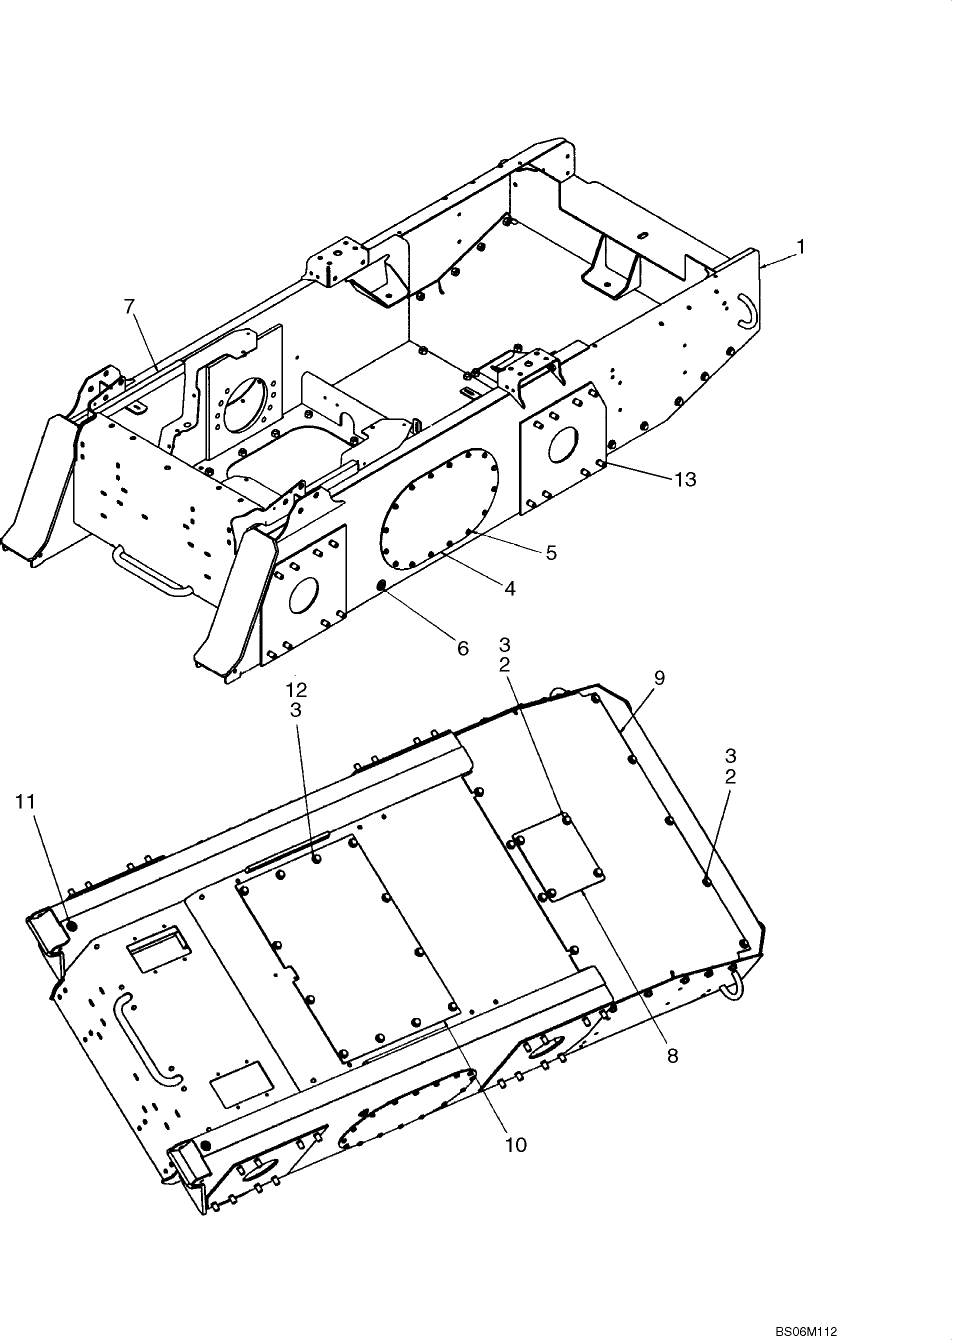 09-01 CHASSIS